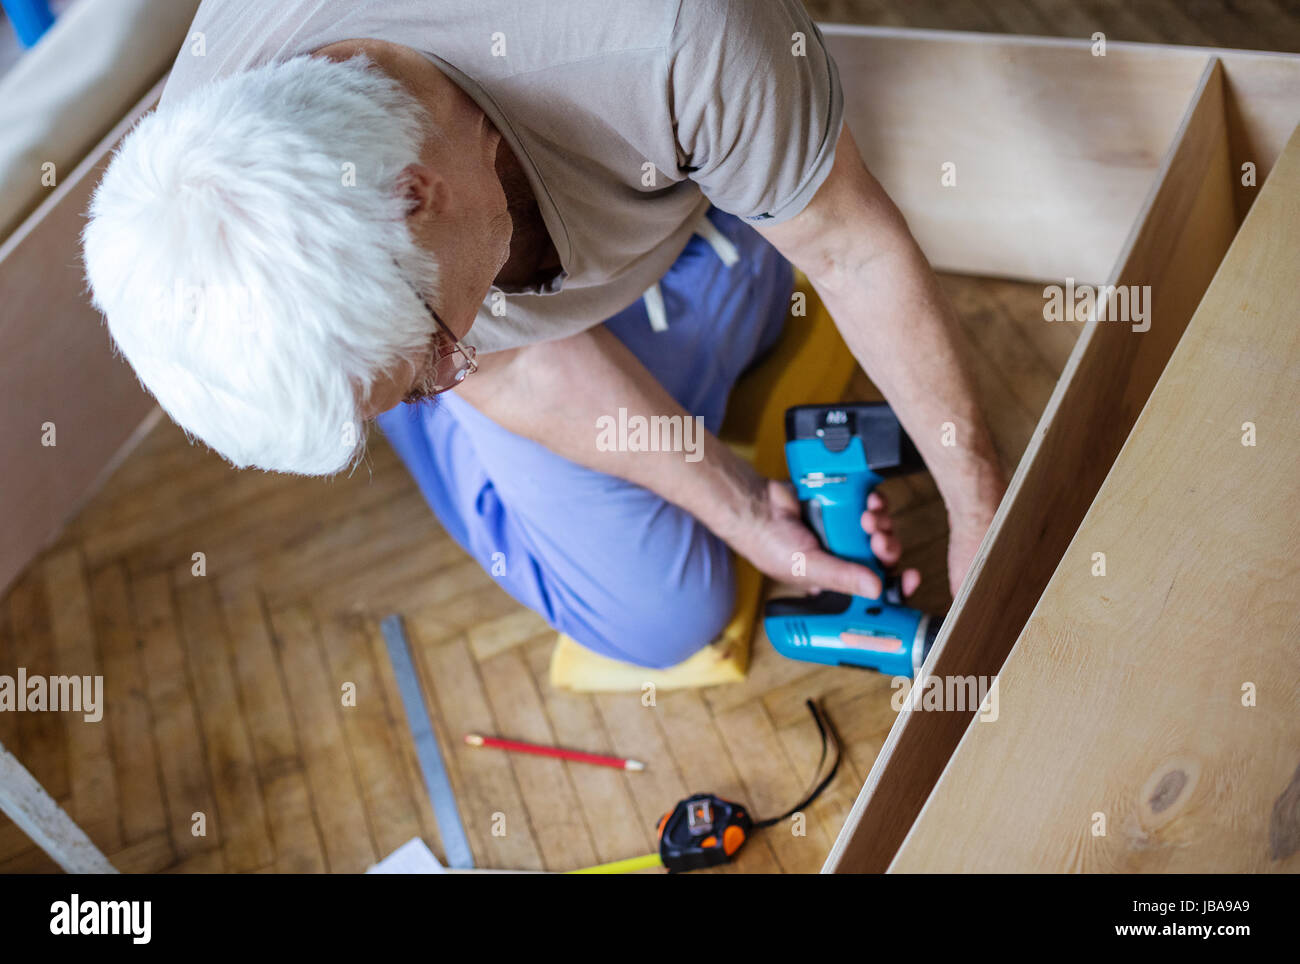 Mature man using electric screwdriver while making bookcase or shelf unit, view from above Stock Photo